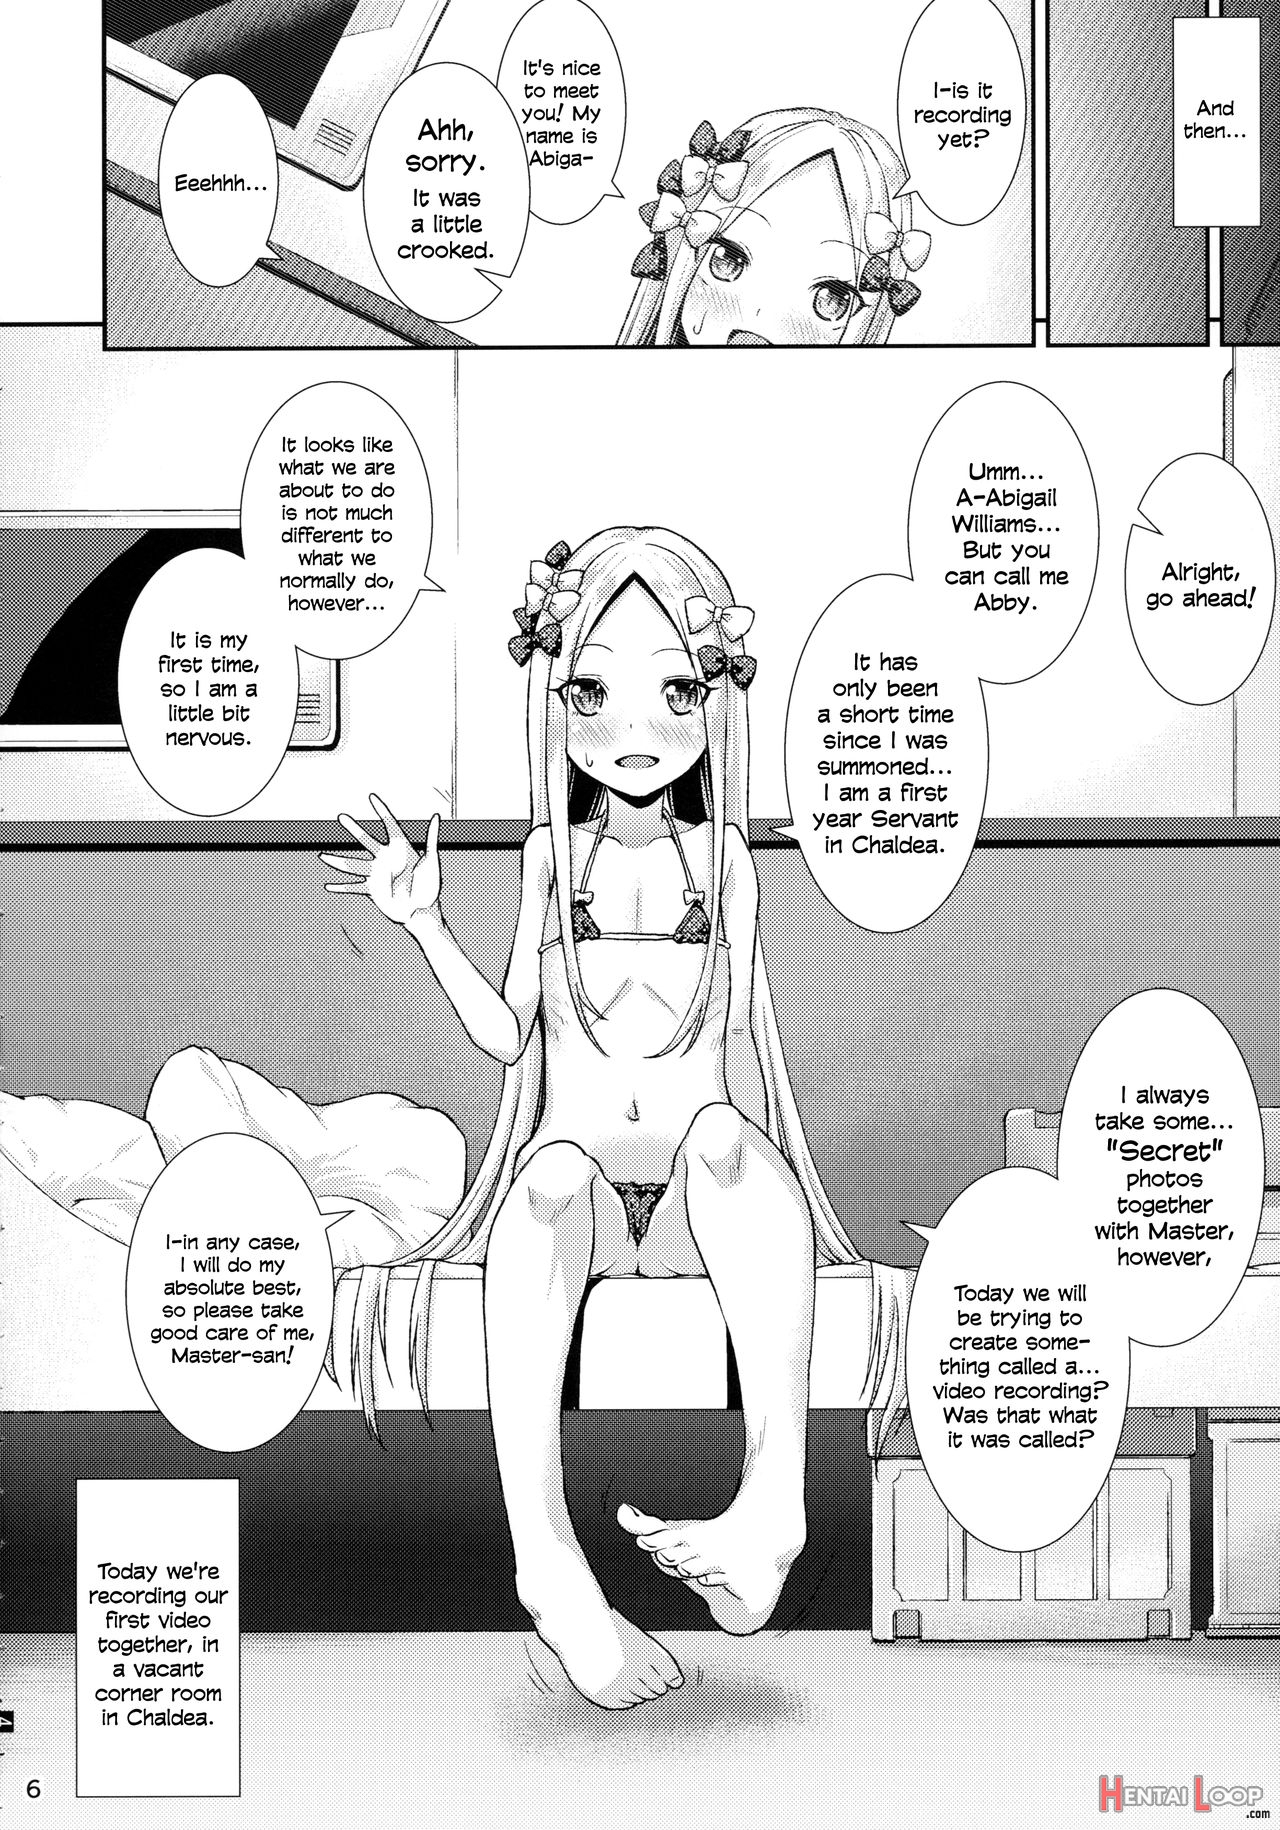 Page 5 of Abby And The Secret Homemade Sex Tape (by Yamazaki Kana) picture